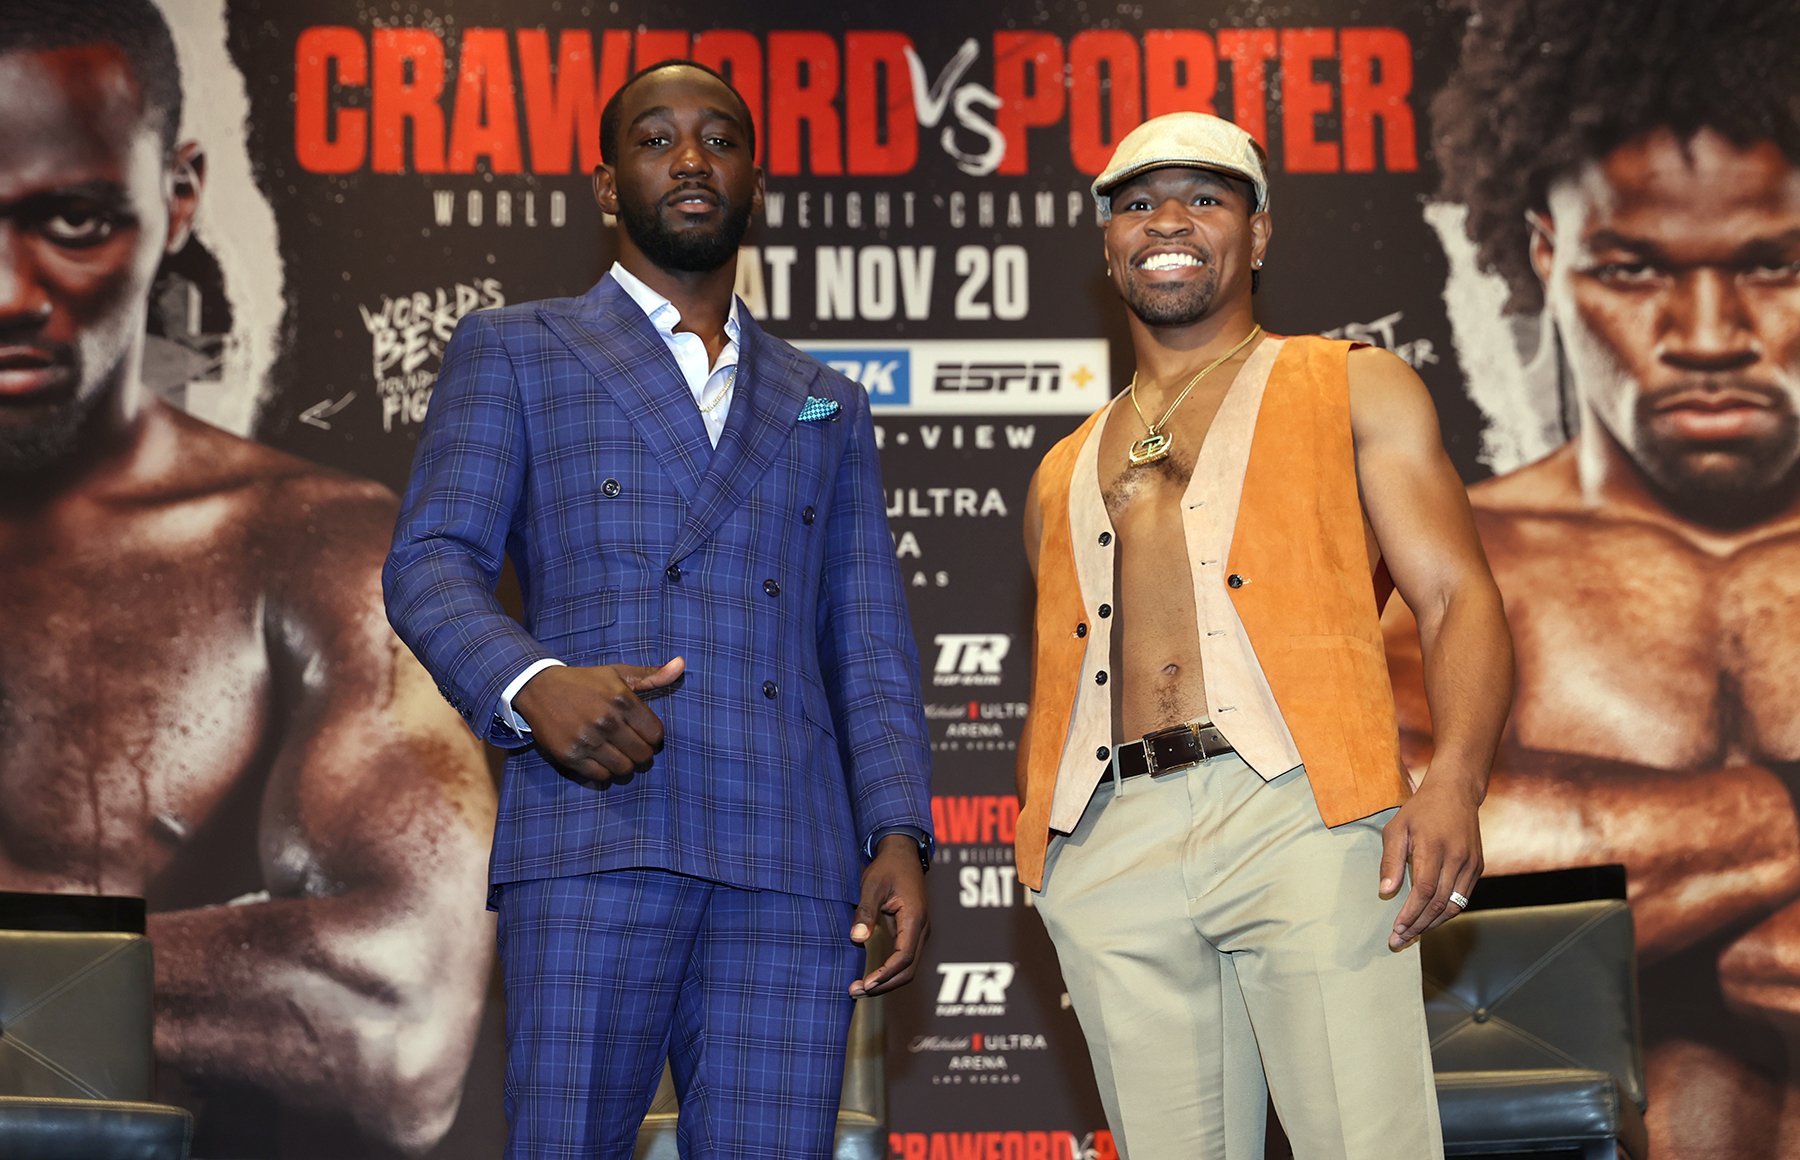 Terence Crawford (L) and Shawn Porter (R) pose during the press conference at MGM Grand Casino on October 09, 2021 in Las Vegas, Nevada. (Photo by Mikey Williams/Top Rank Inc via Getty Images)